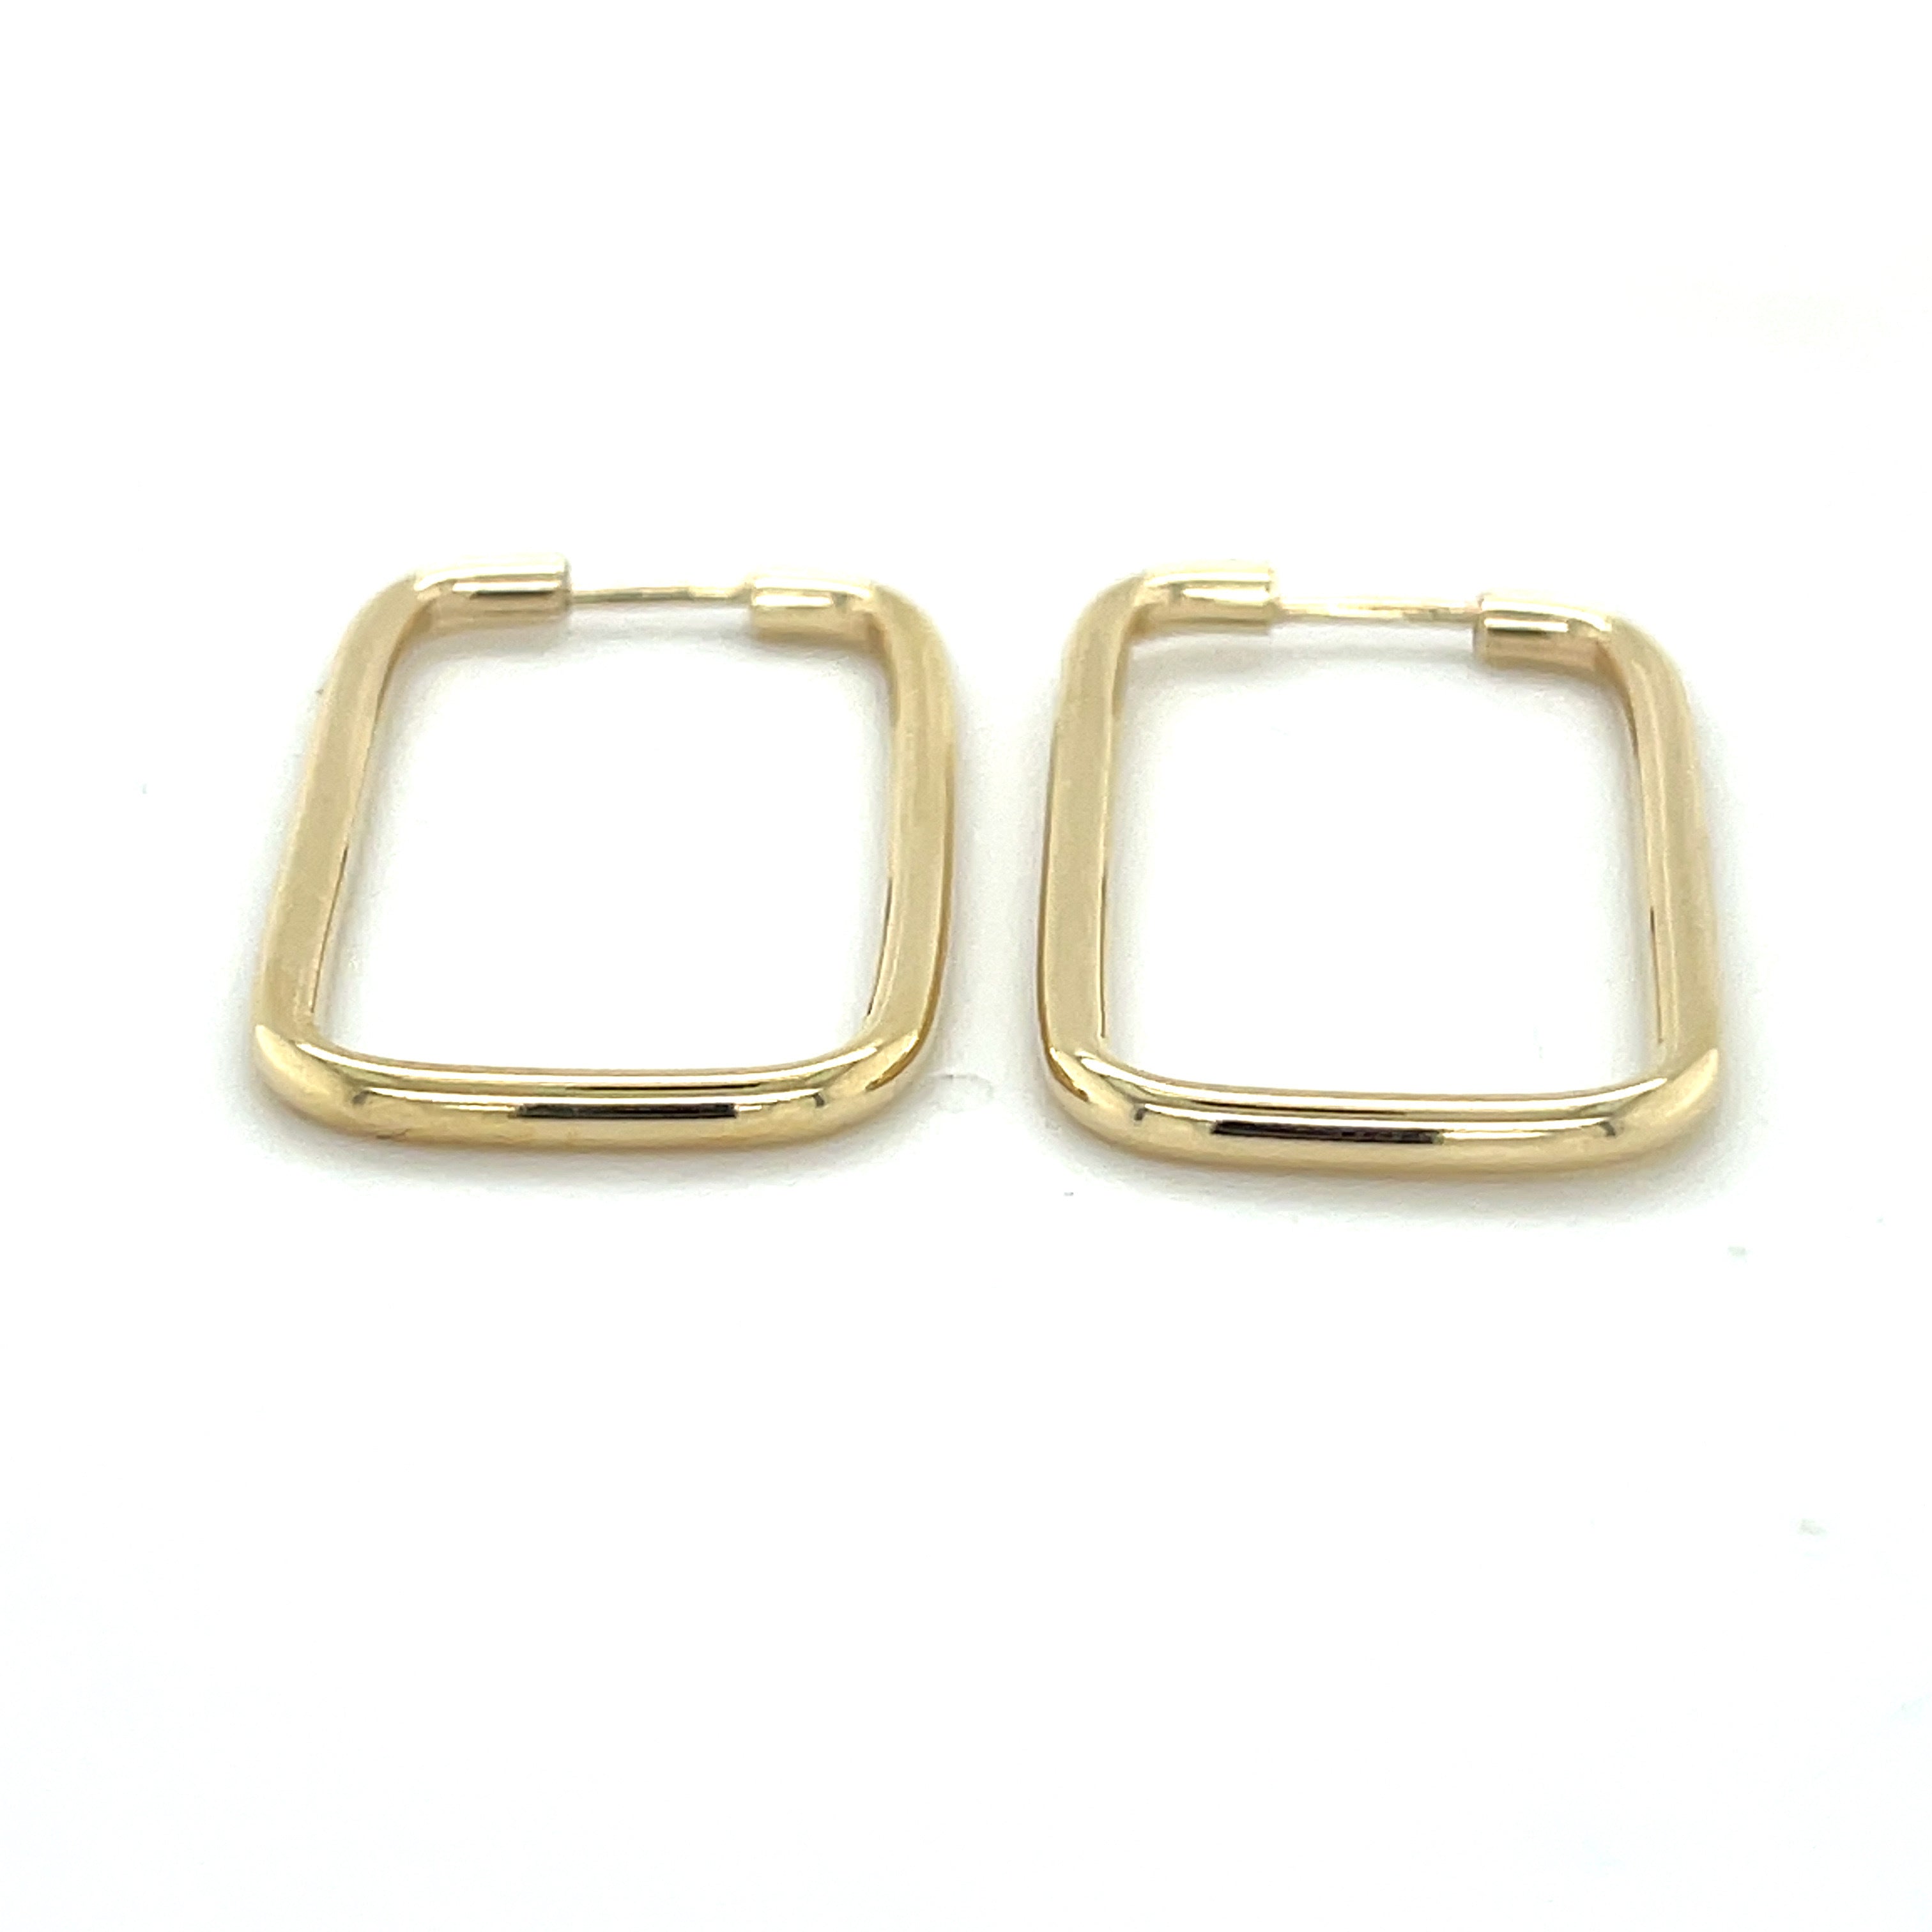 Large 14K Gold Endless Rectangle Hoops